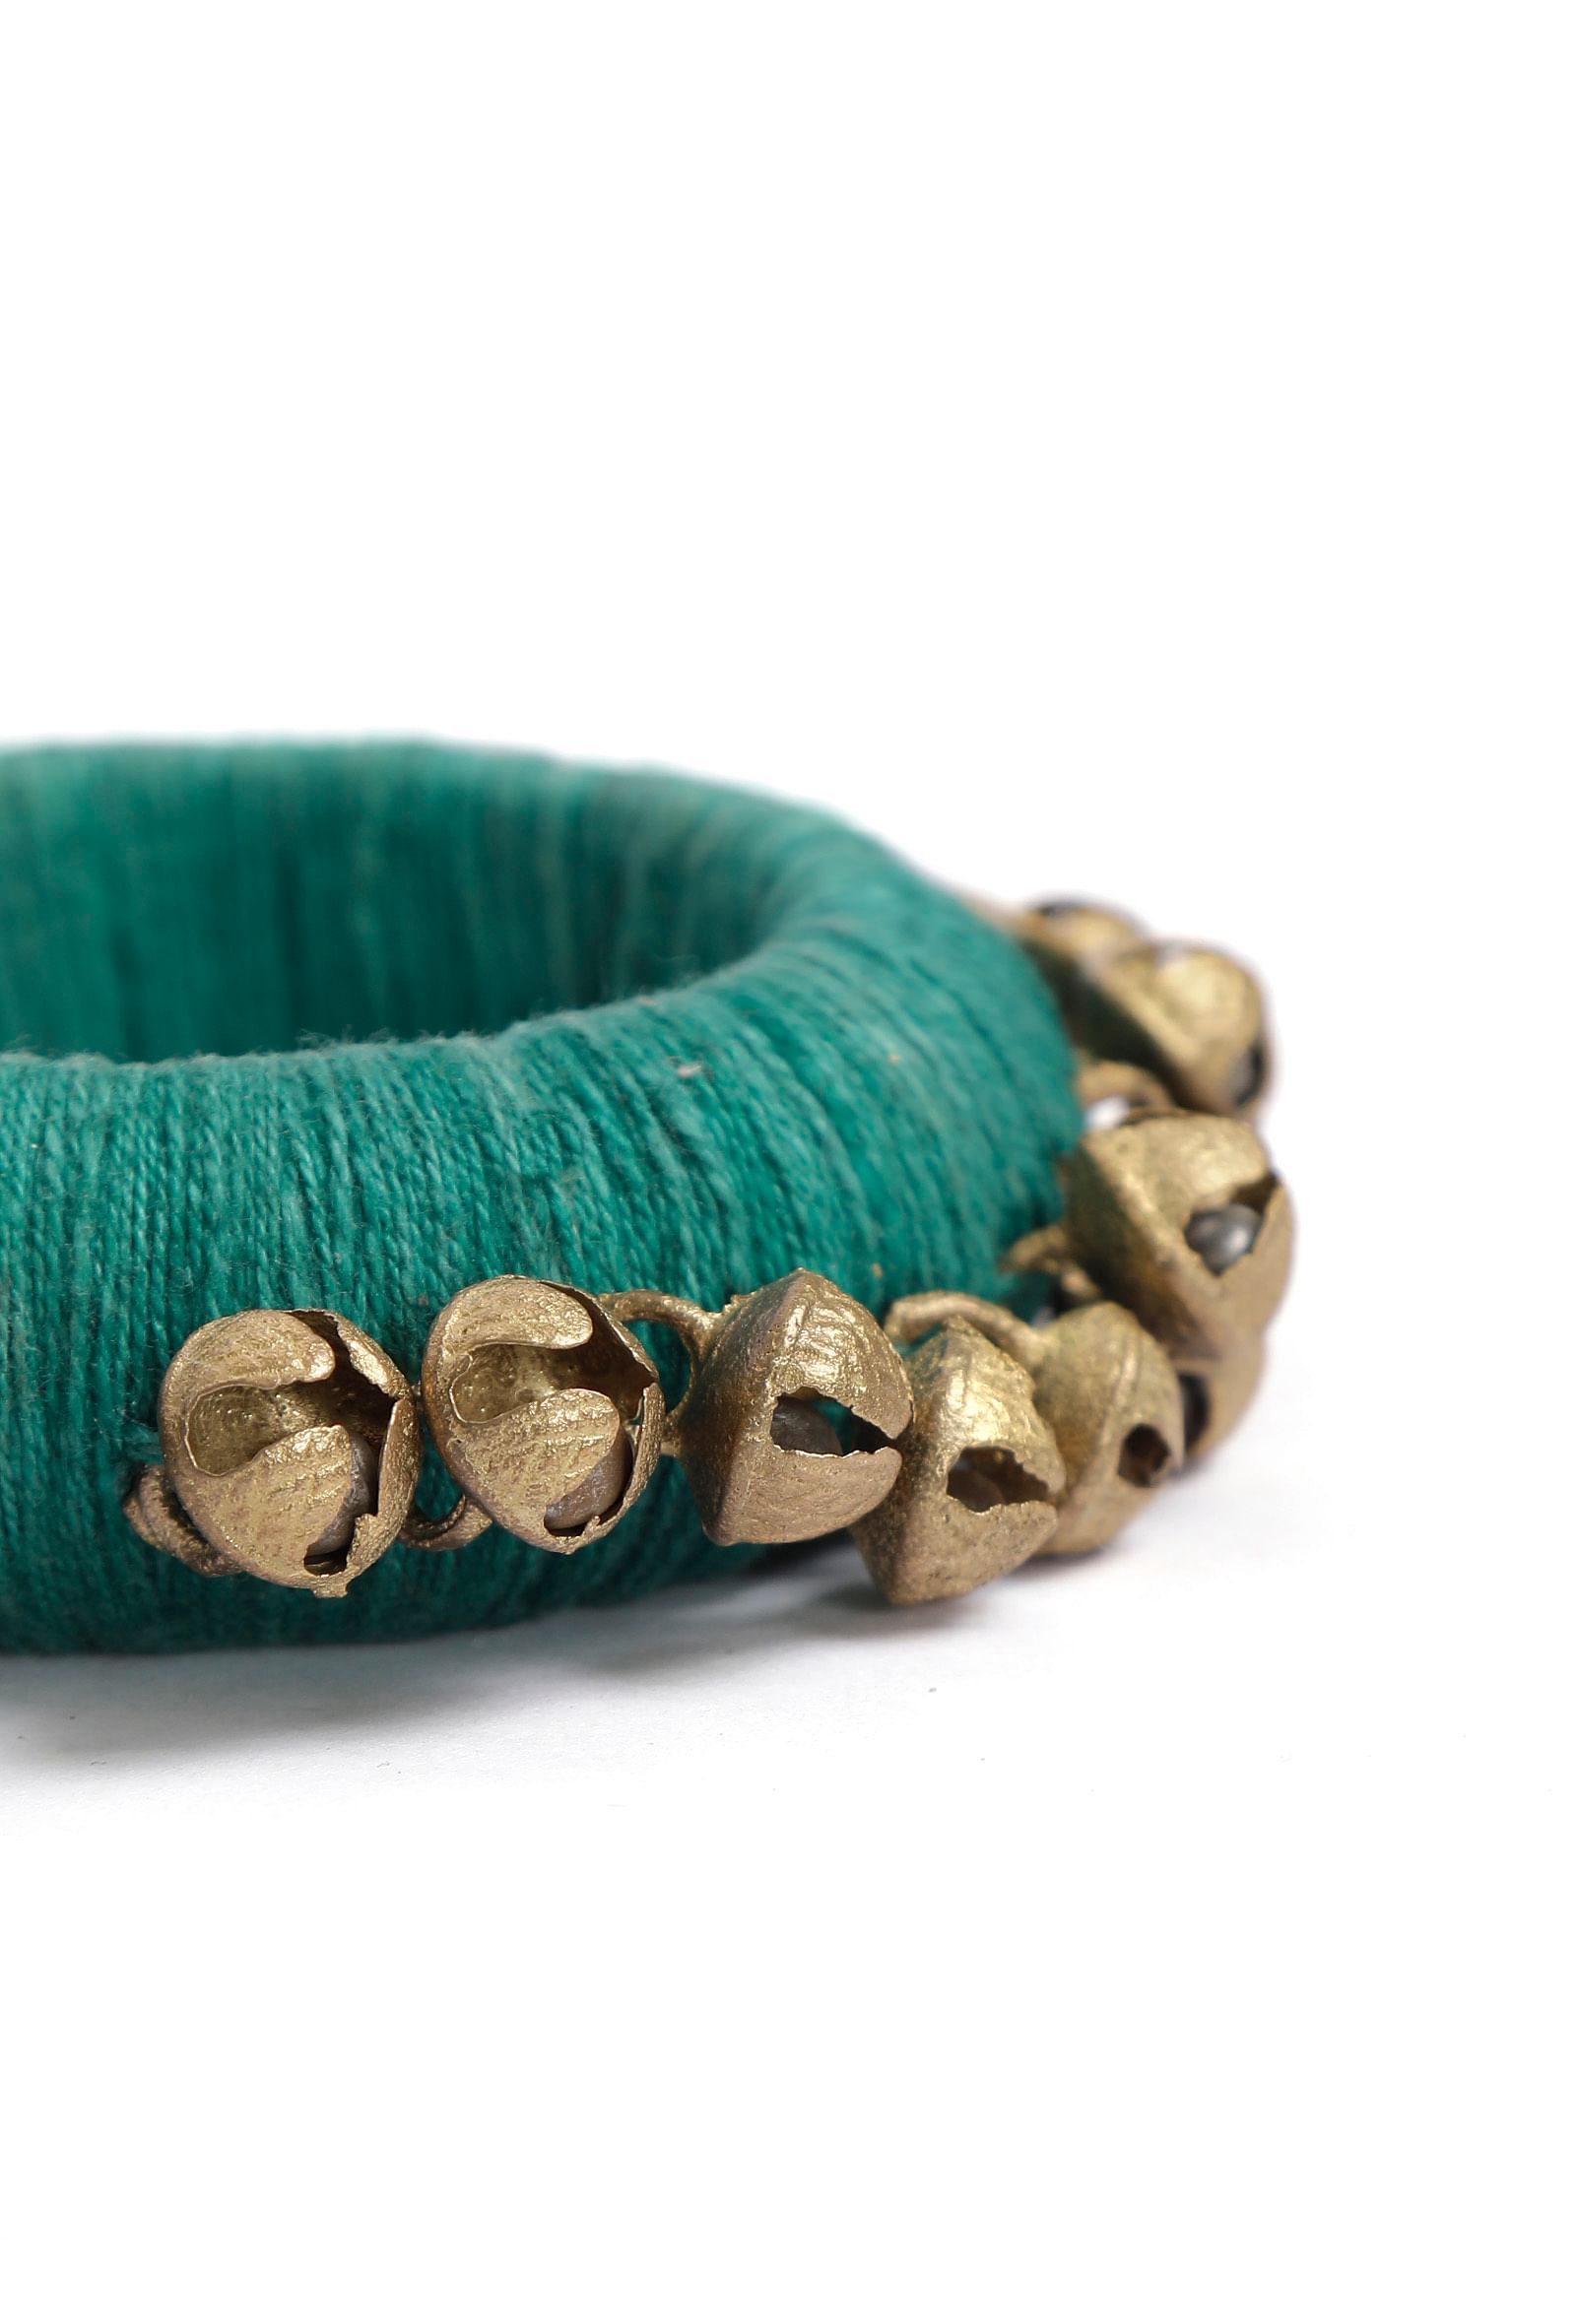 Teal Thread Wooden Bangles